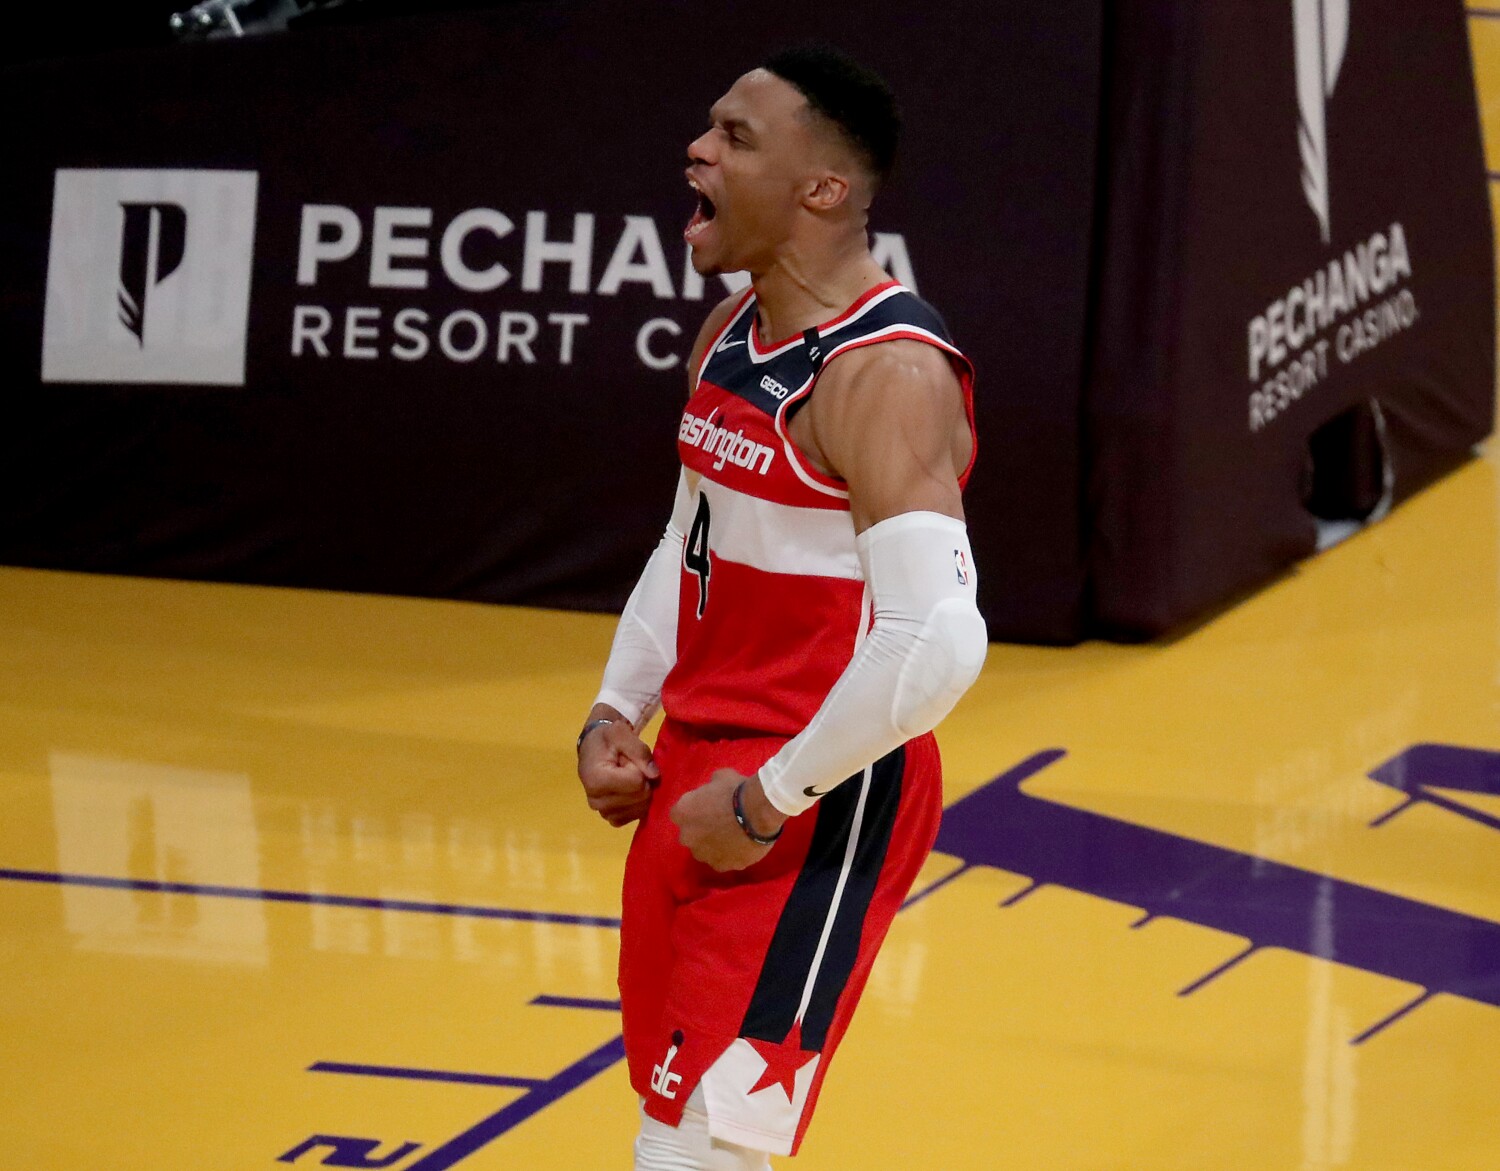 Lakers agree on deal to acquire Wizards' Russell Westbrook